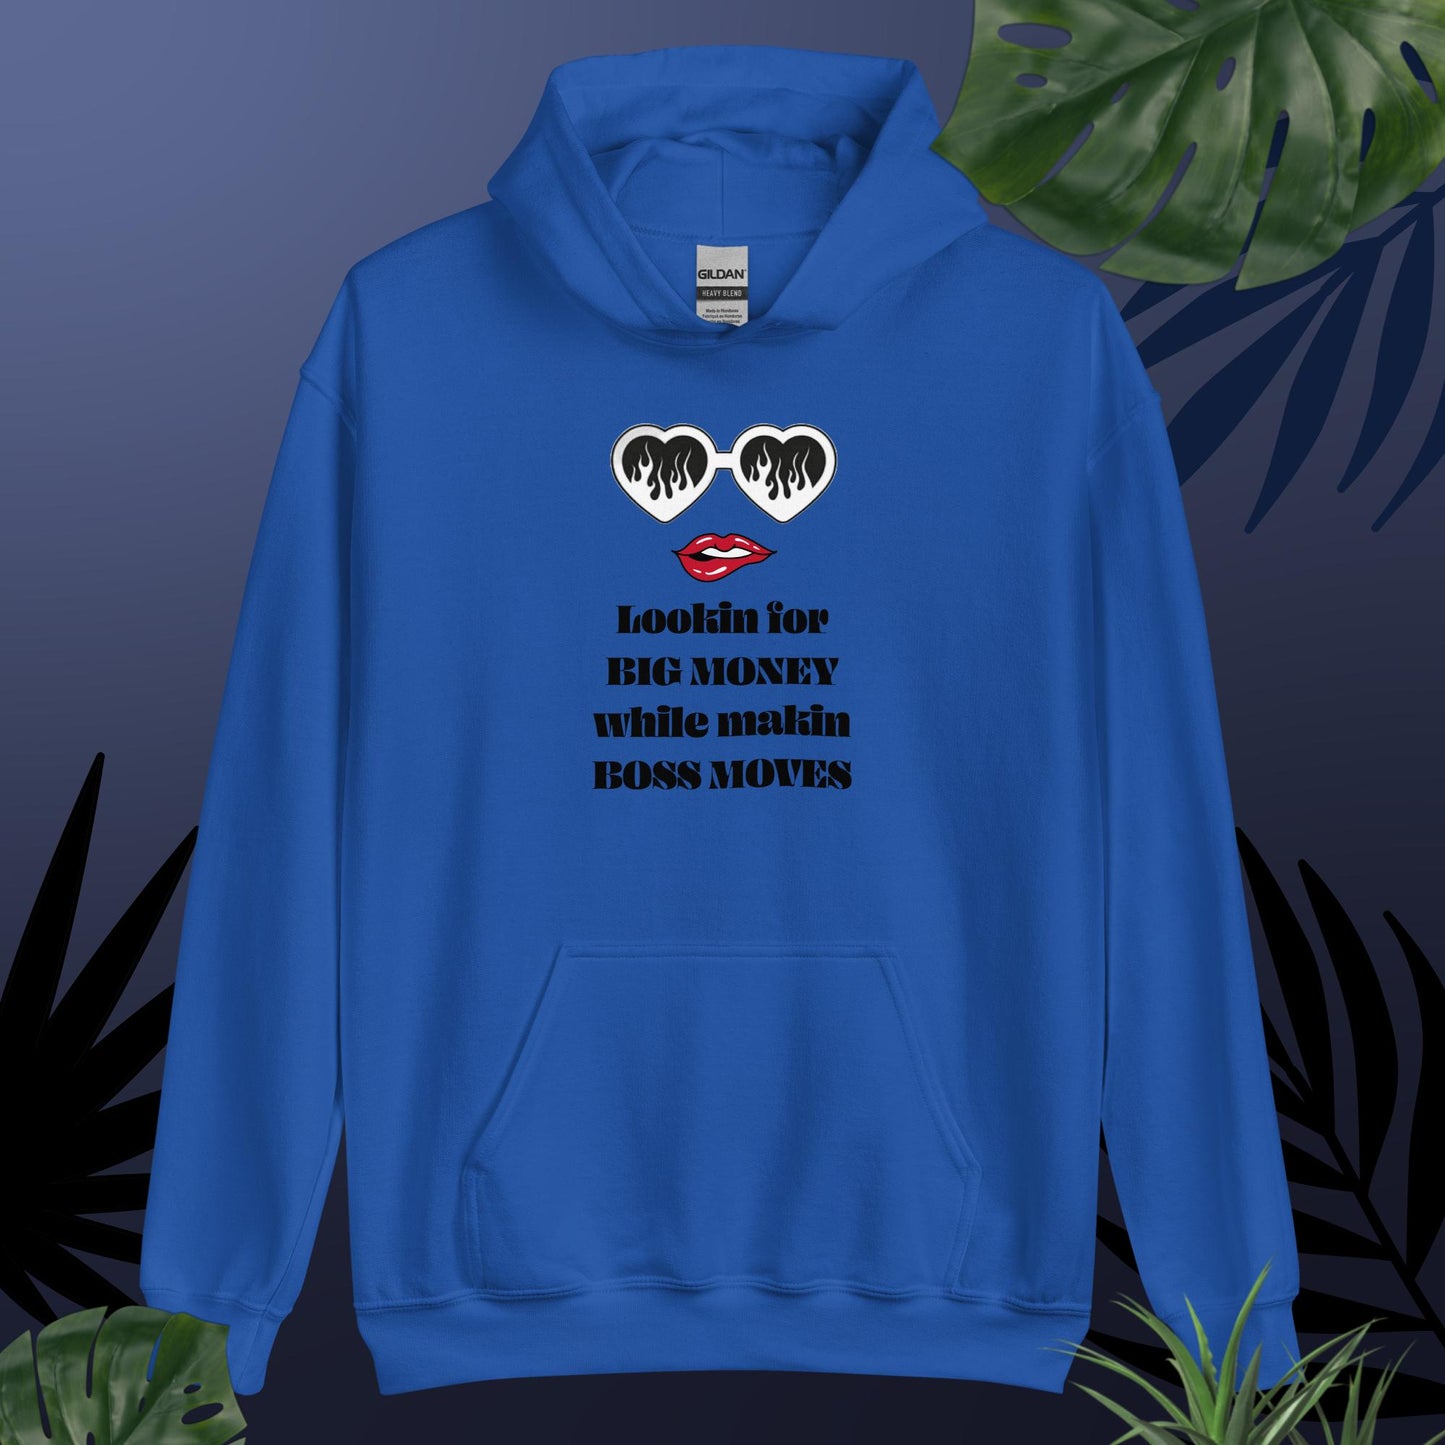 Looking for Big Money High Quality Hoodie